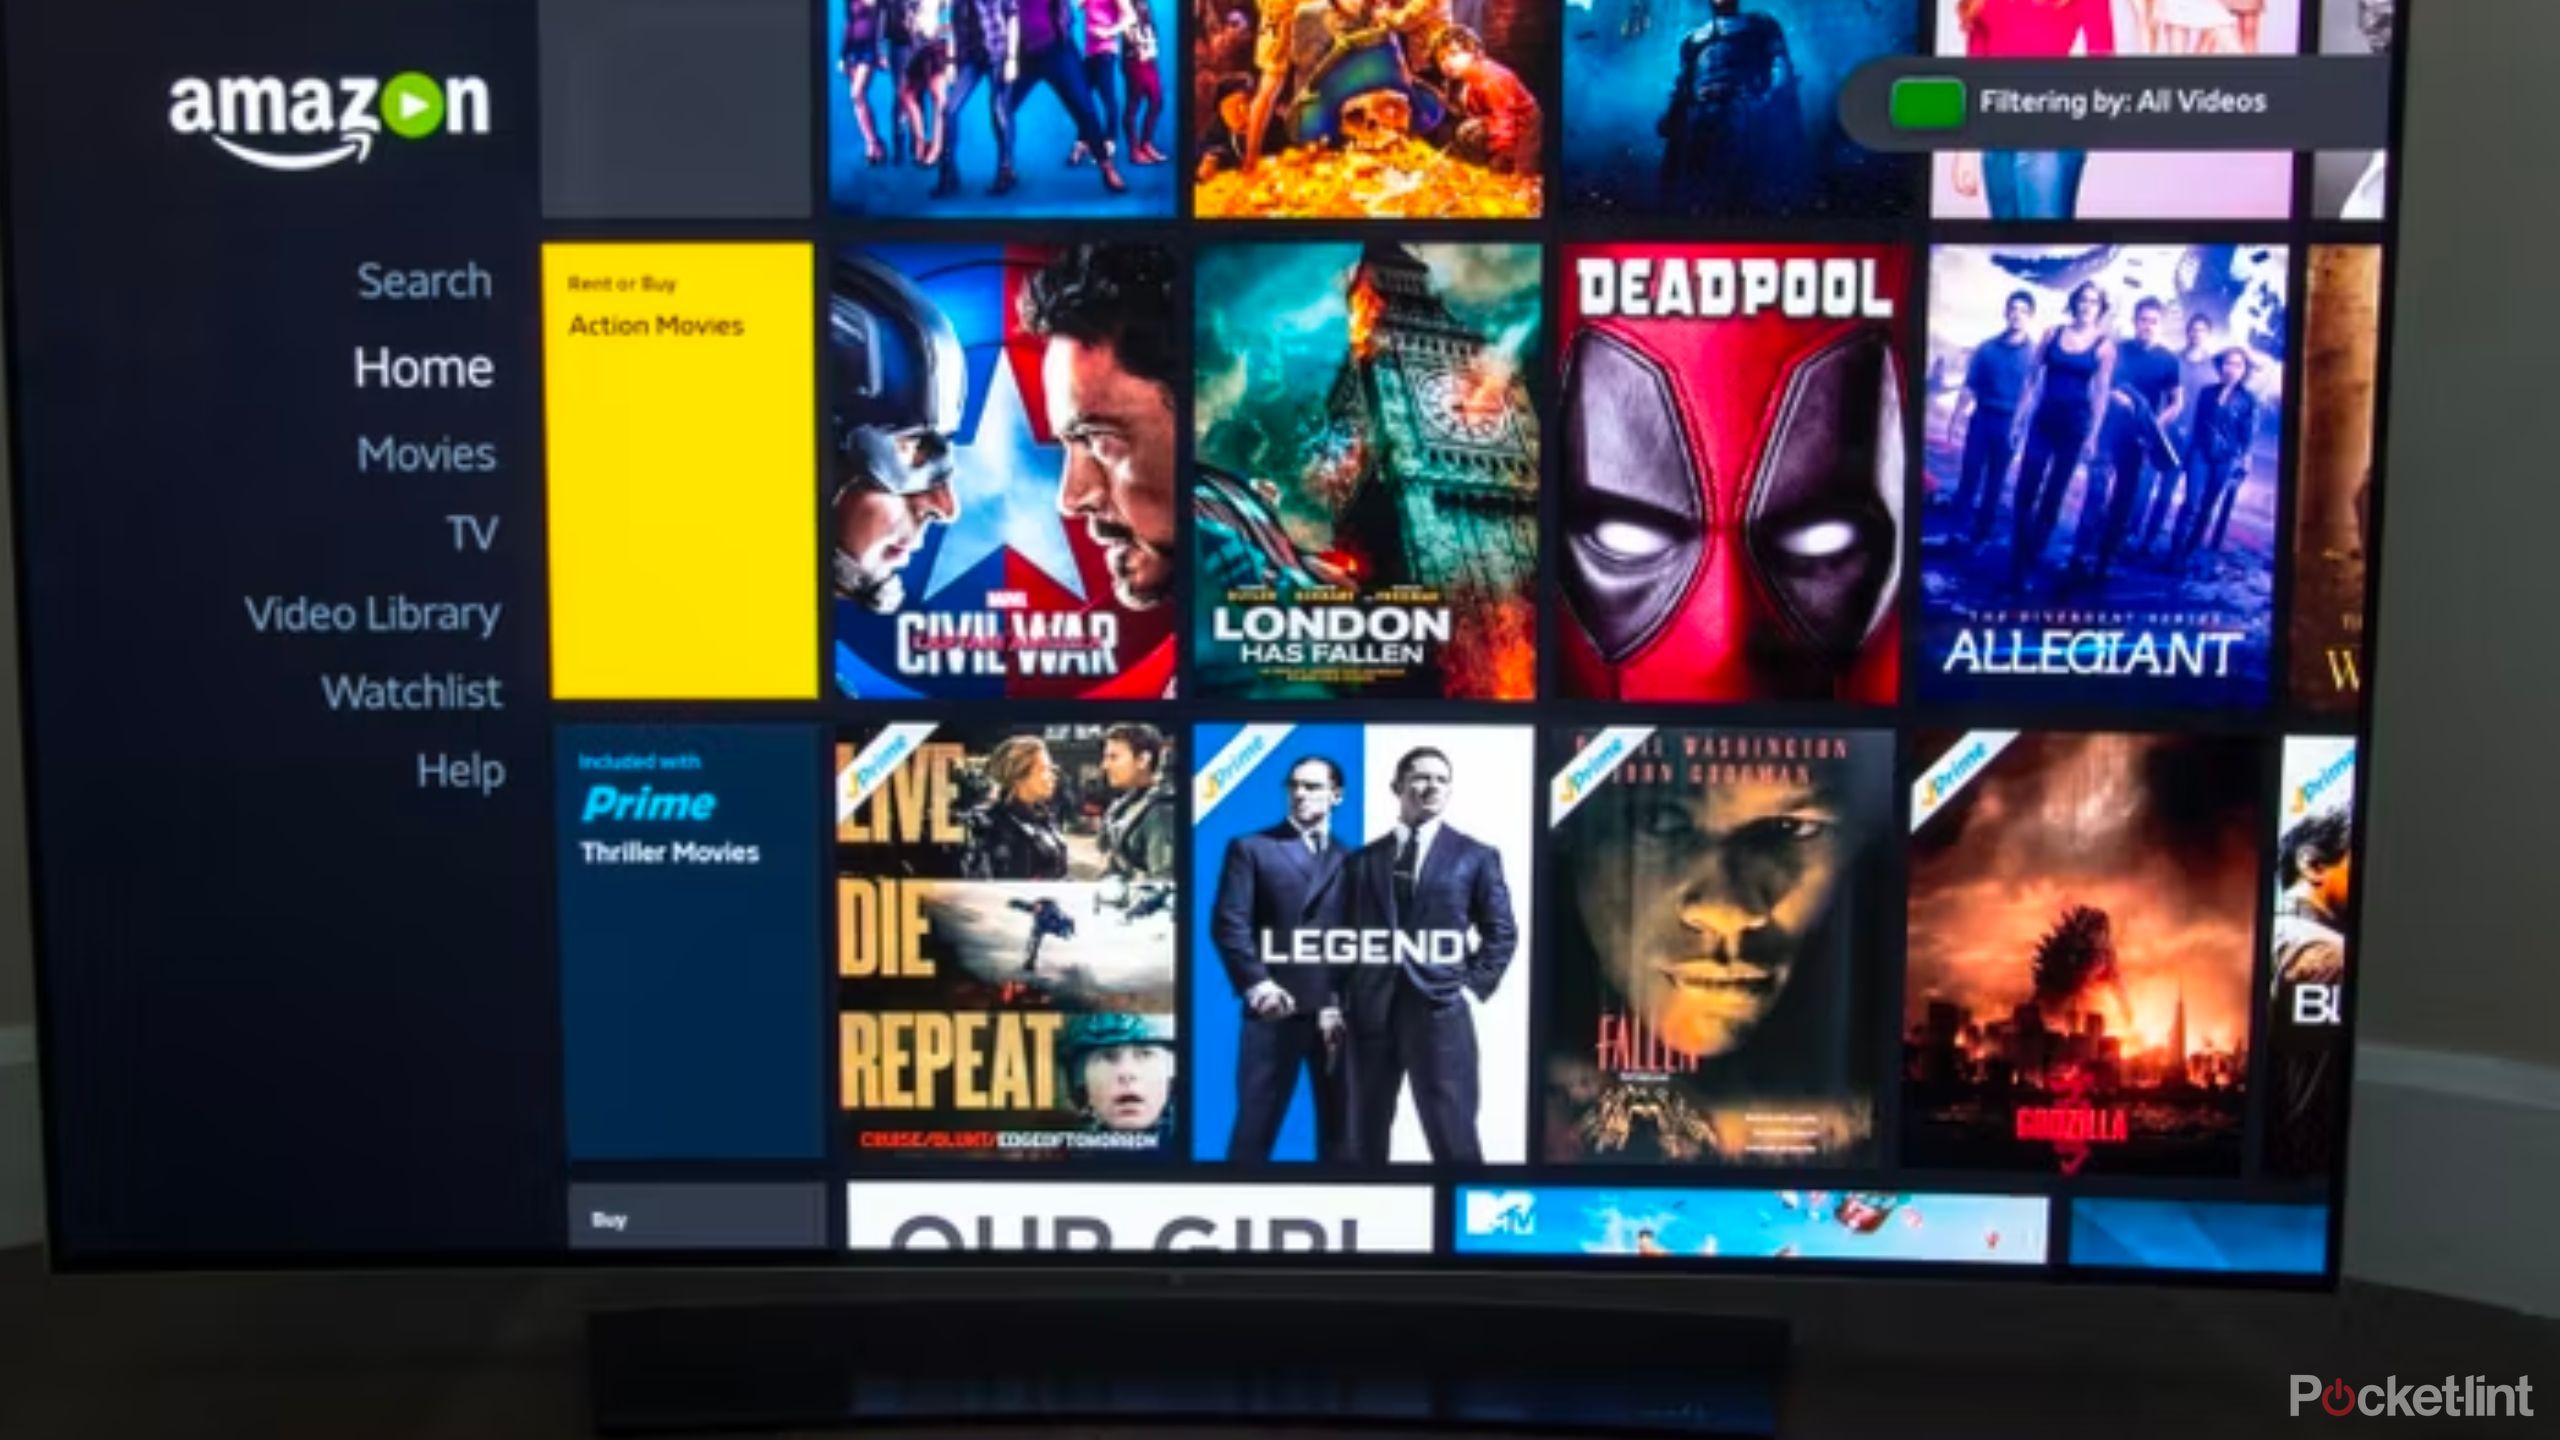 4 upgrades that would make Tizen my ideal TV OS